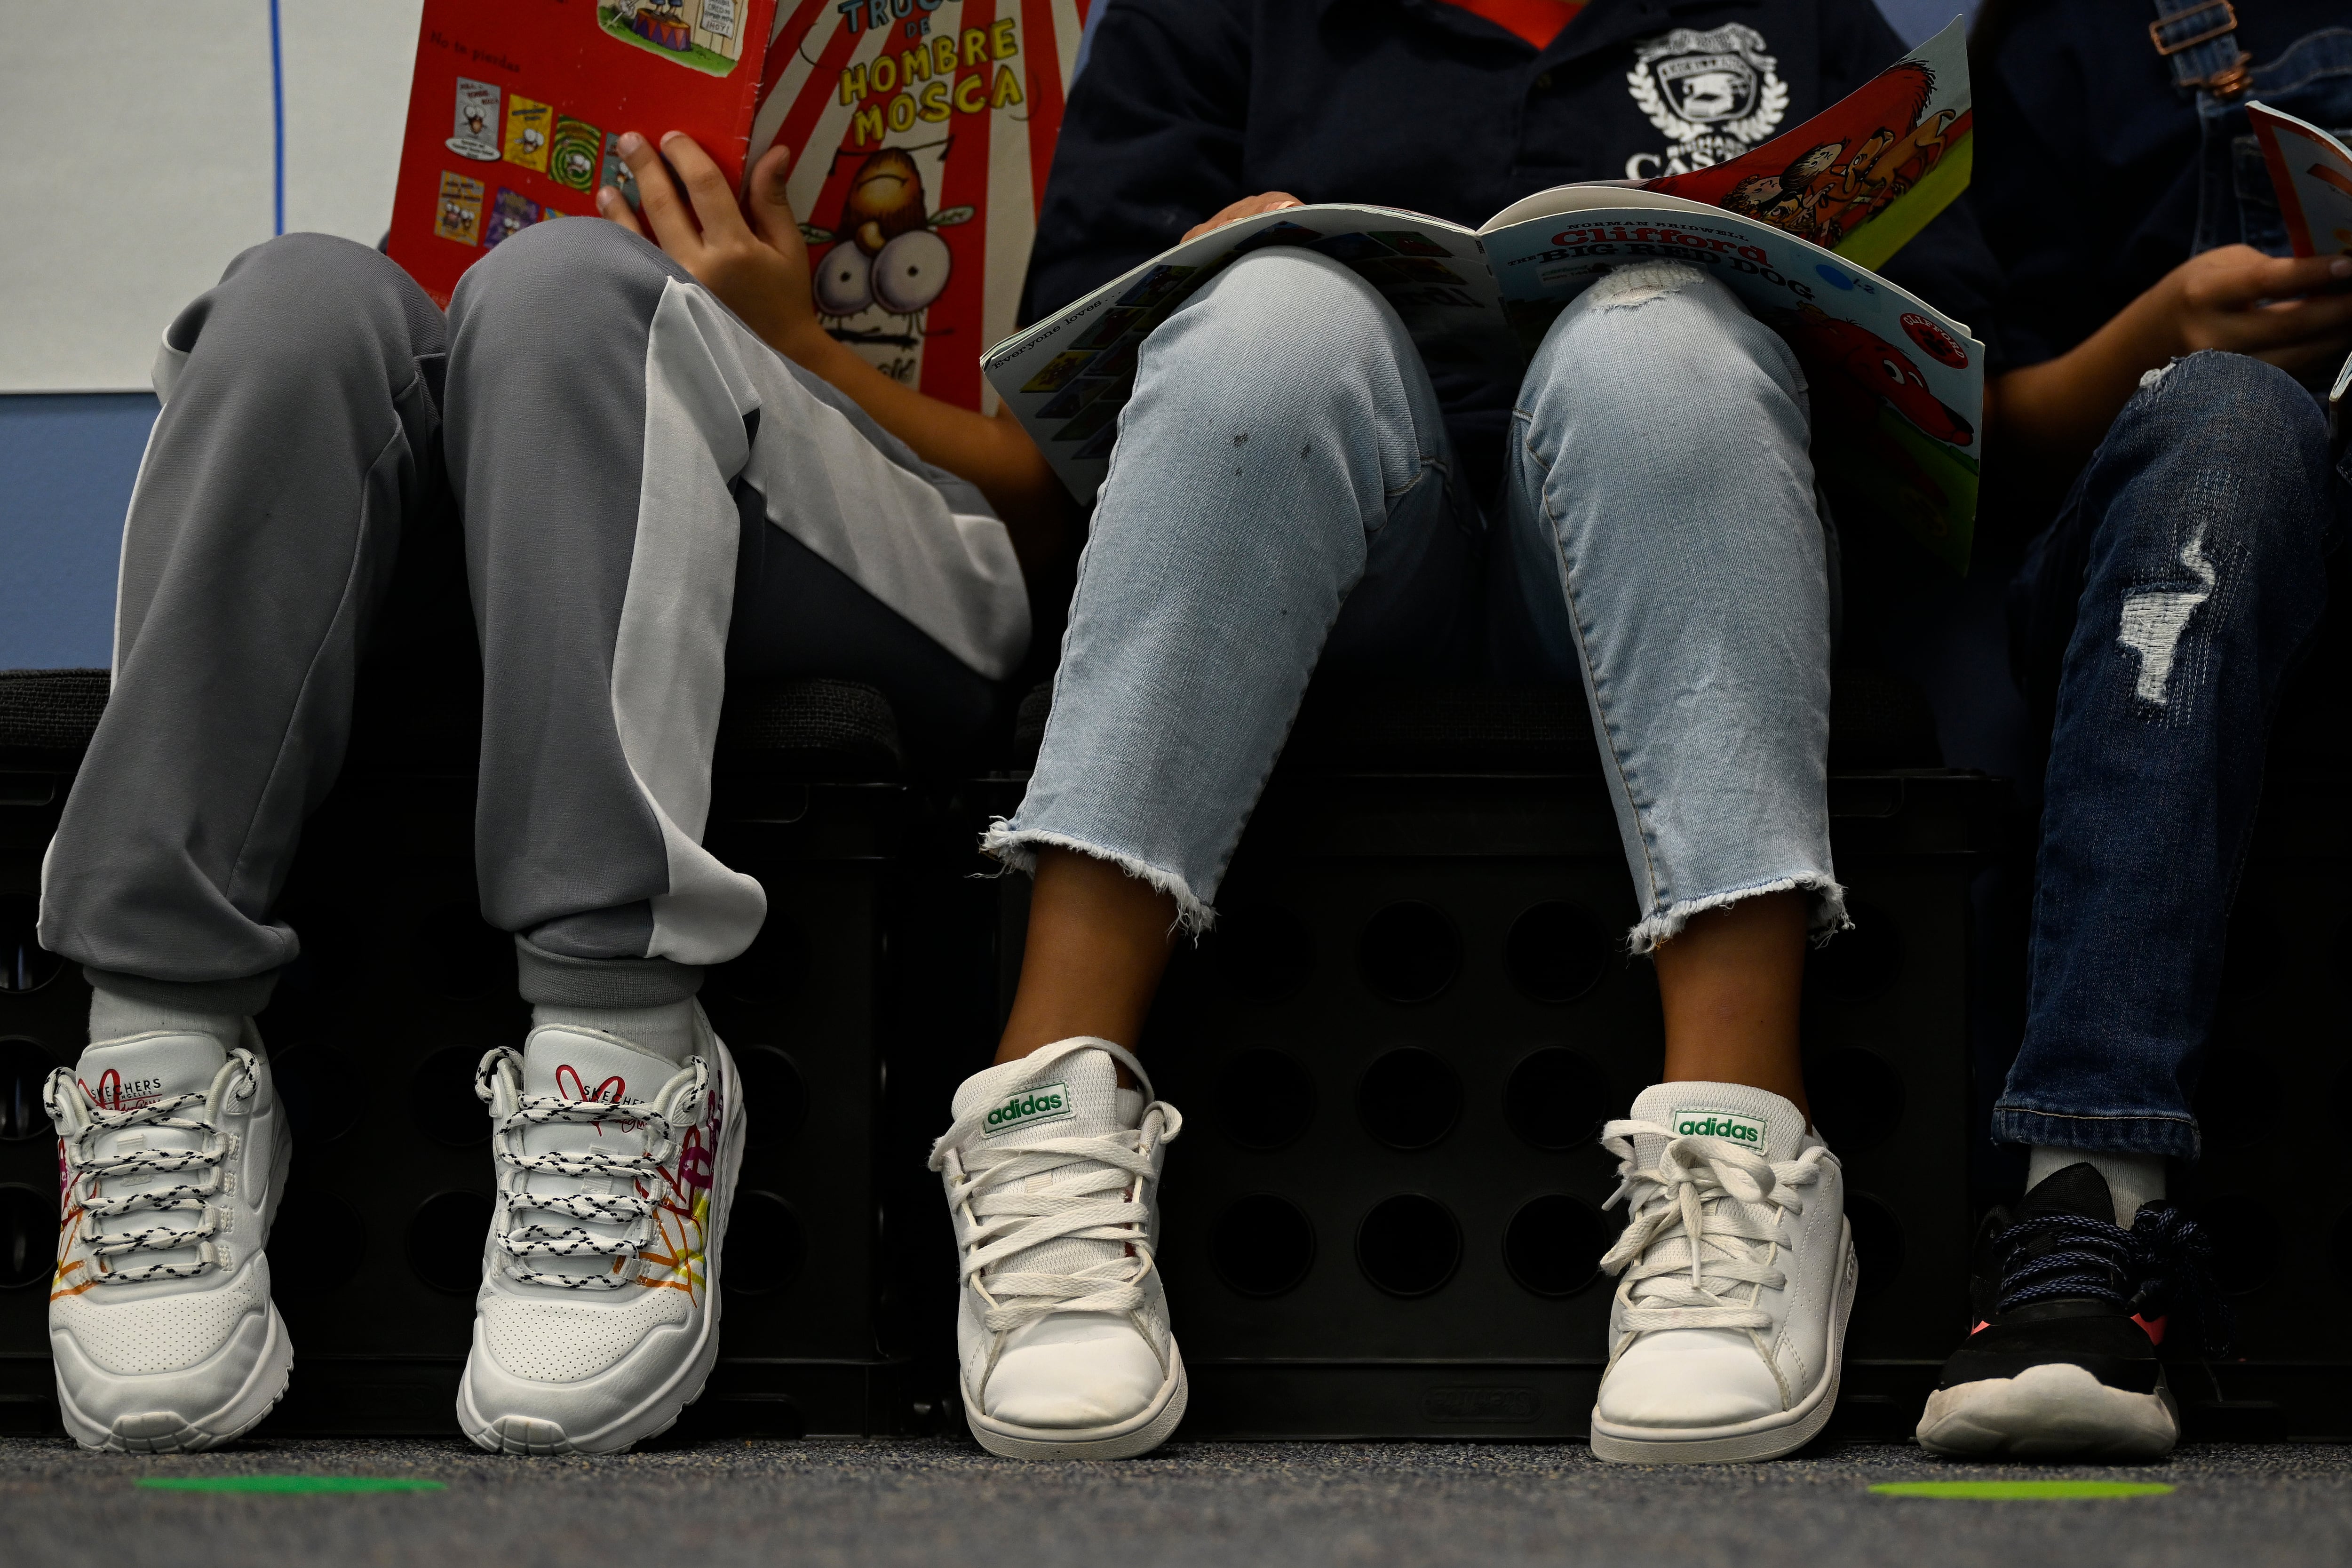 Three students sit side by side and read books. The photo shows just their legs and their sneakers.